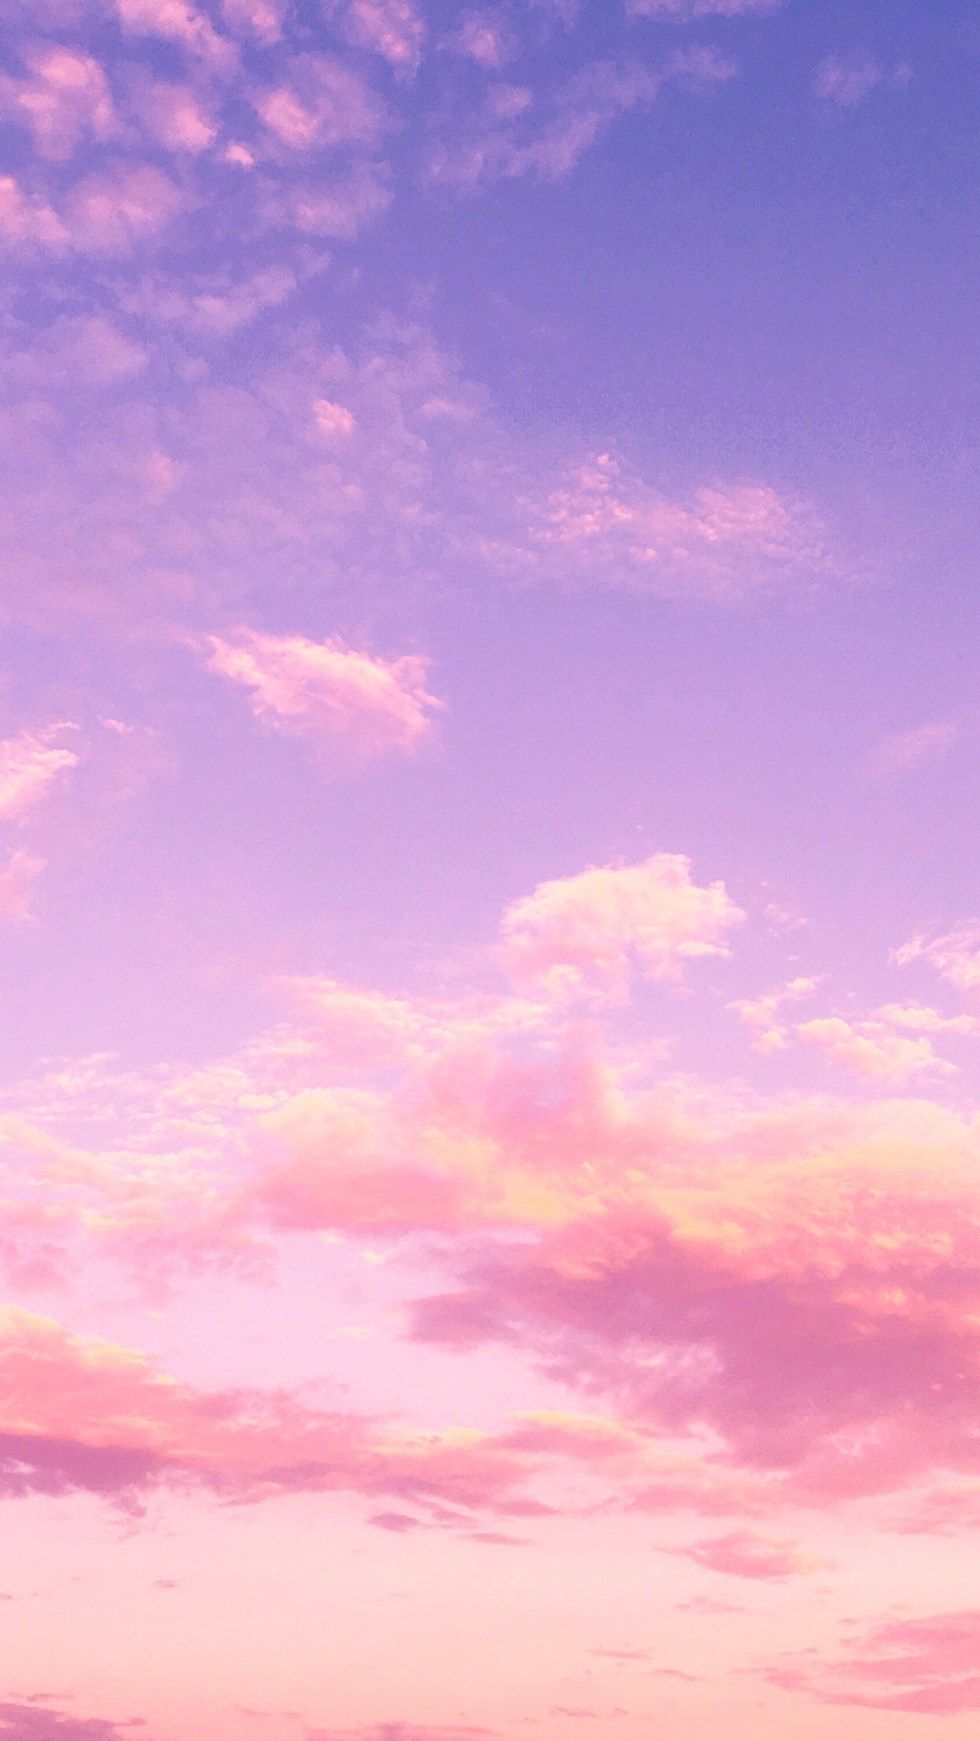 IPhone wallpaper of a pink and purple sky with clouds - Phone